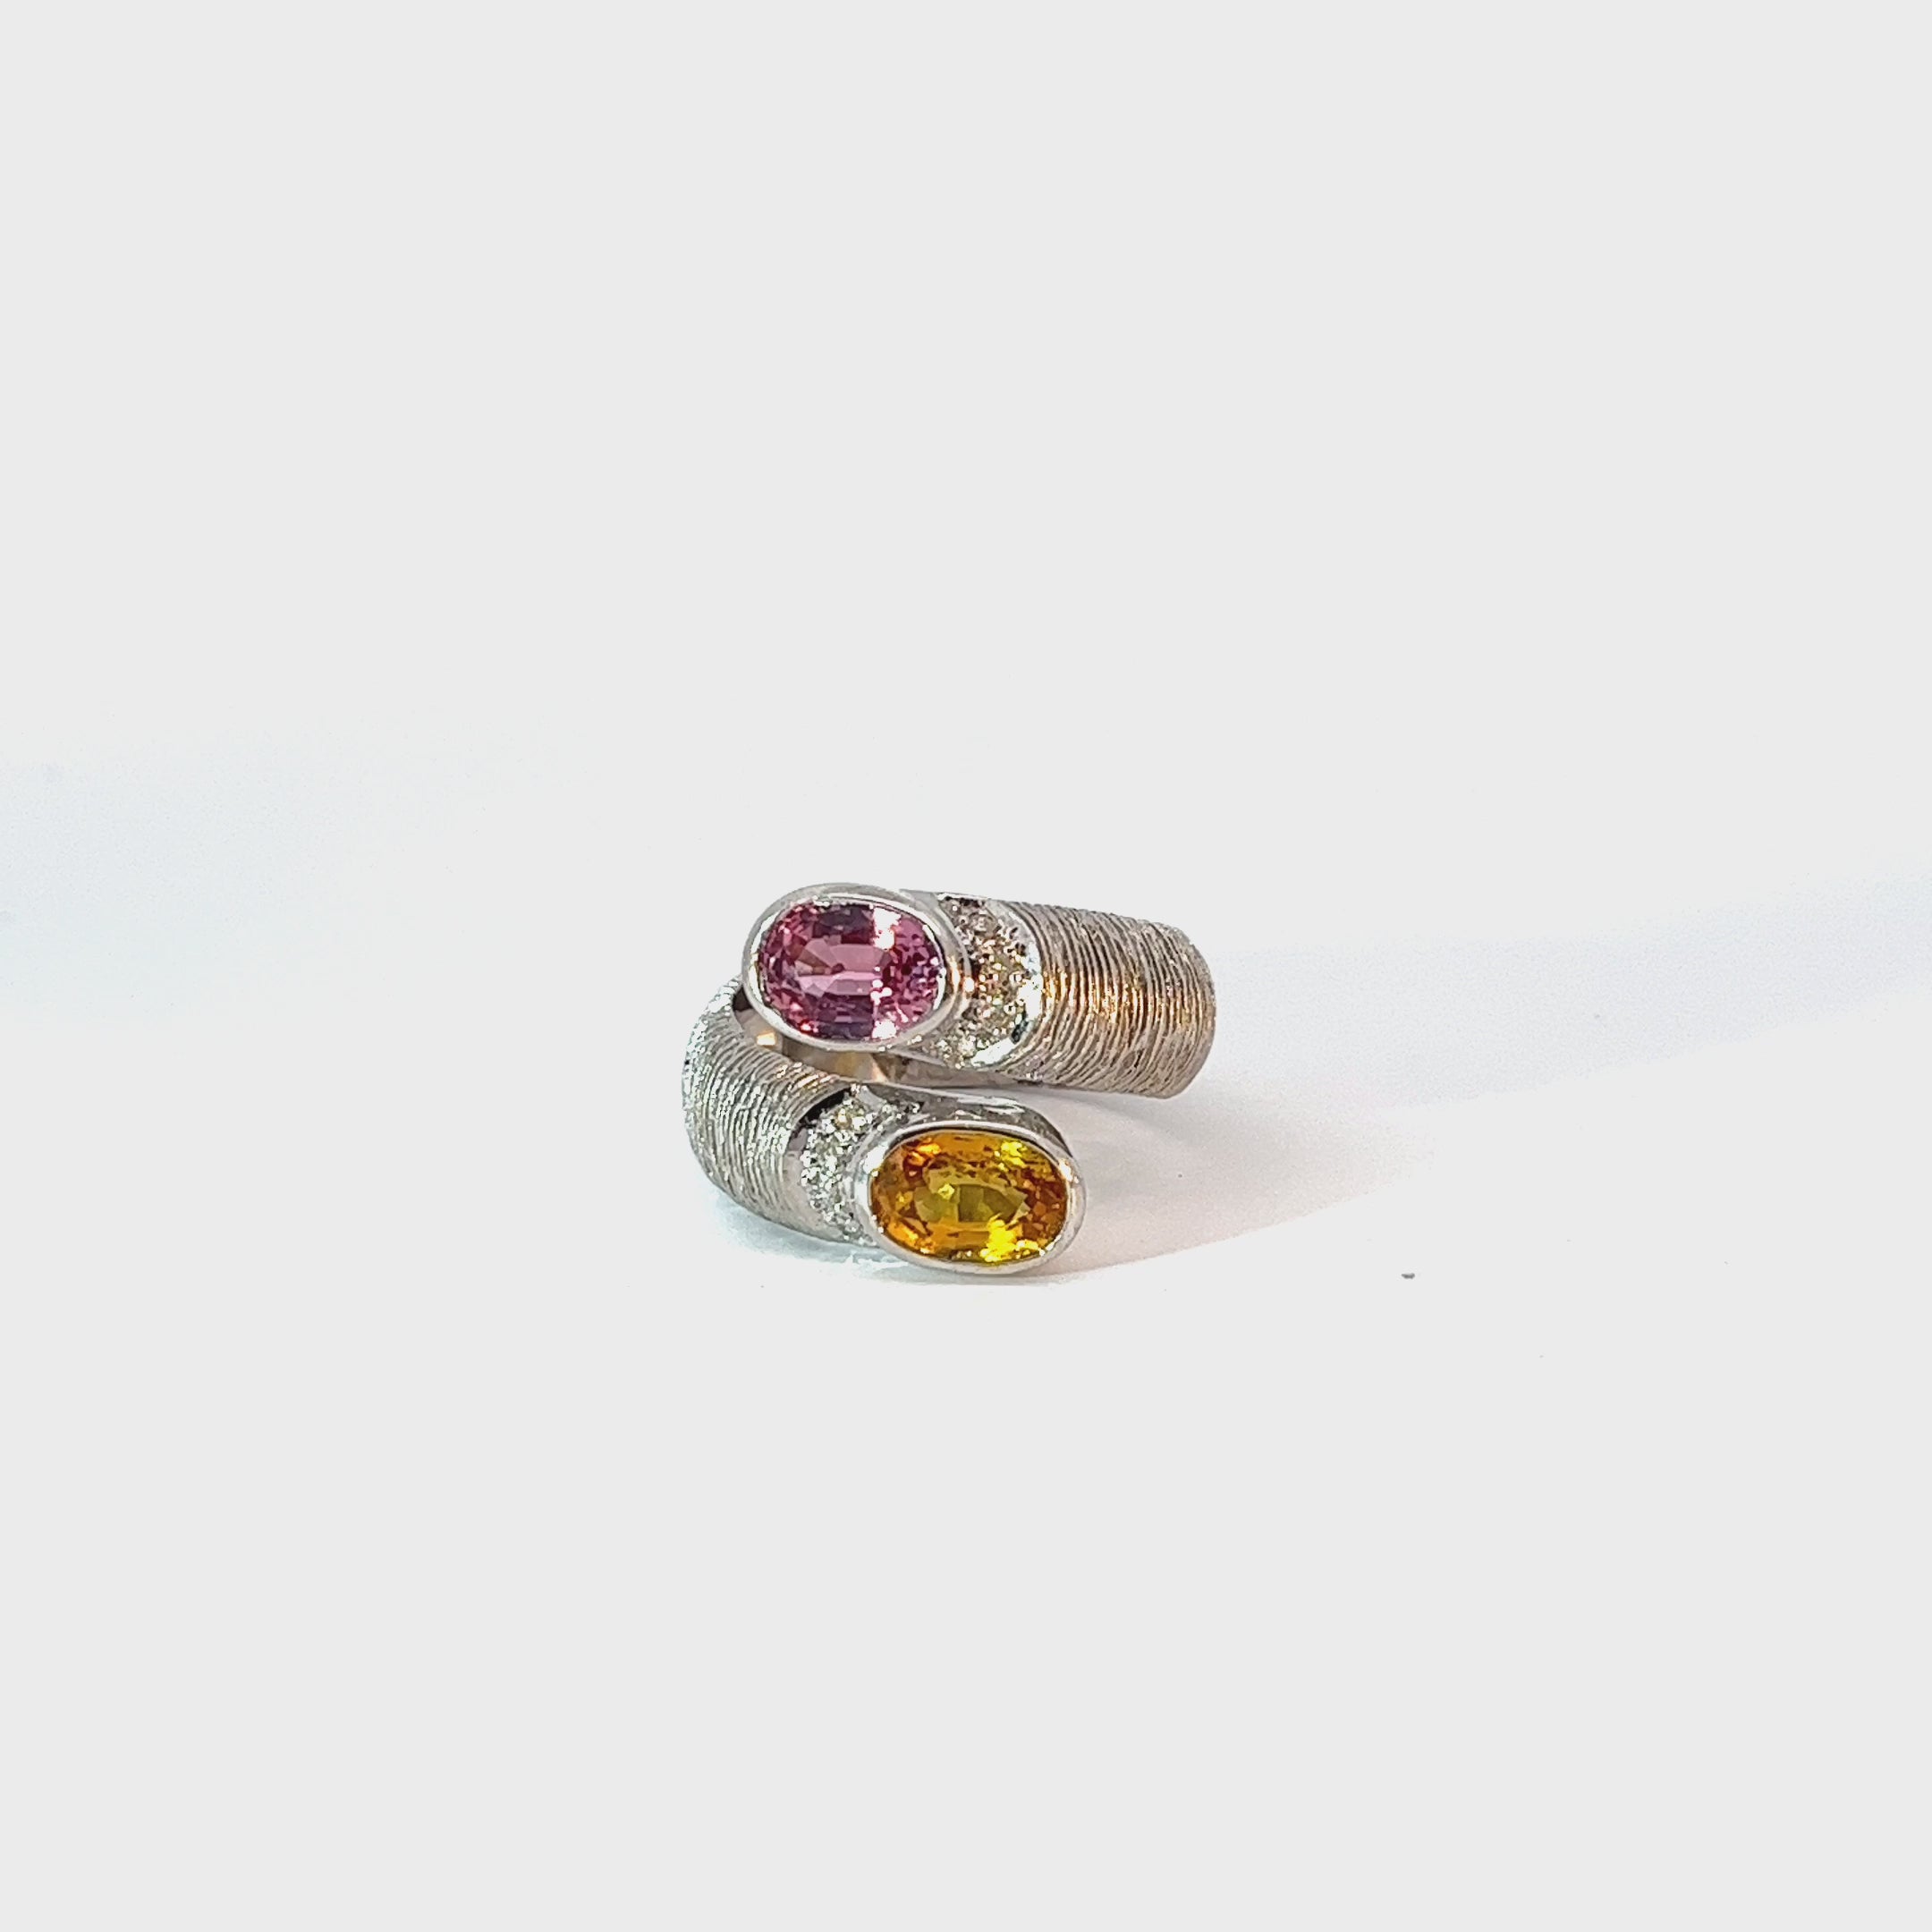 Ladies 18k White Gold Pink and Yellow Sapphire Ring